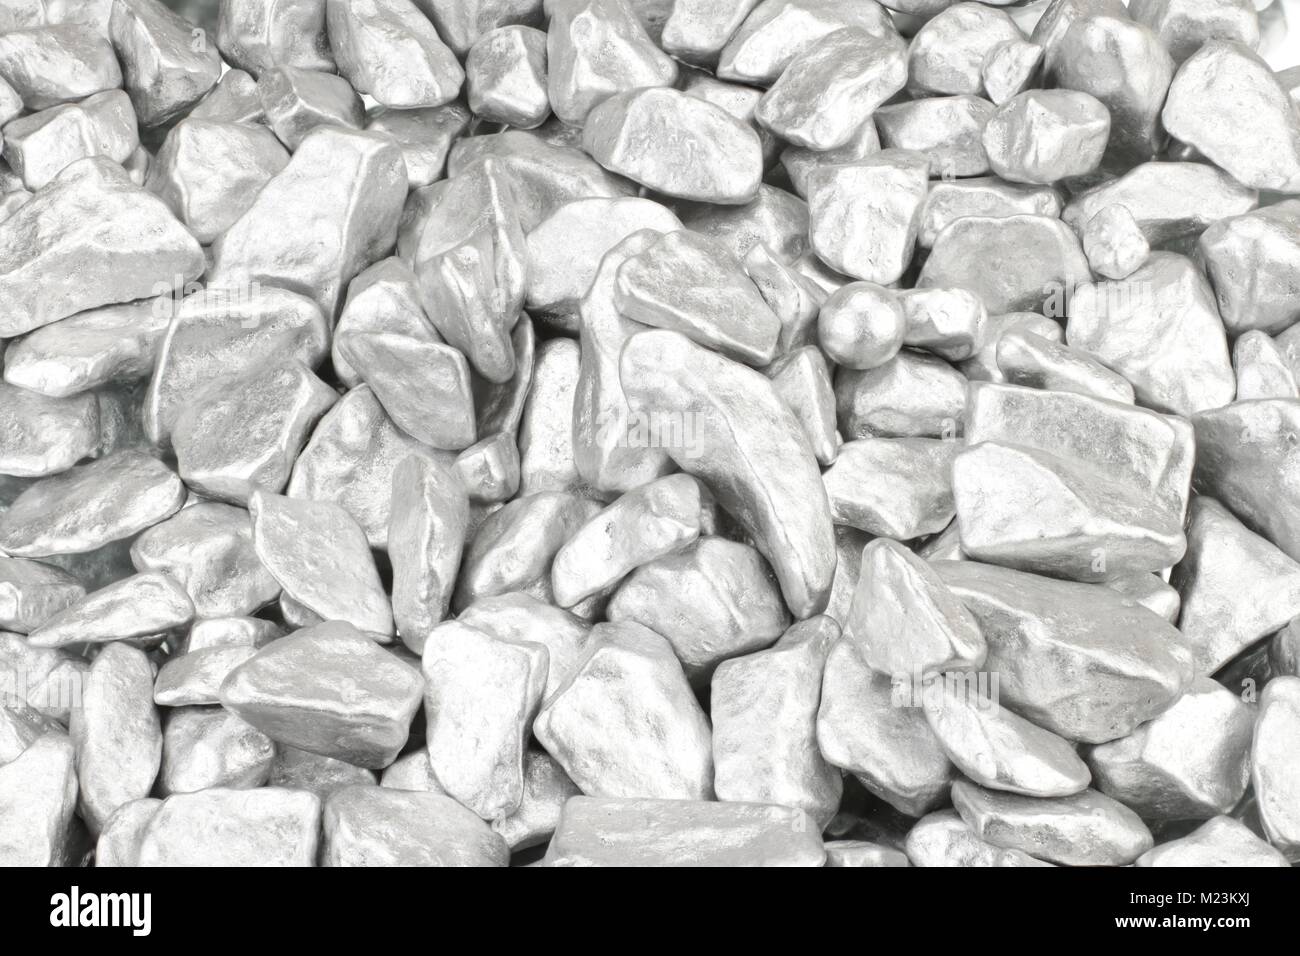 Background of many shiny and silver stone chips Stock Photo